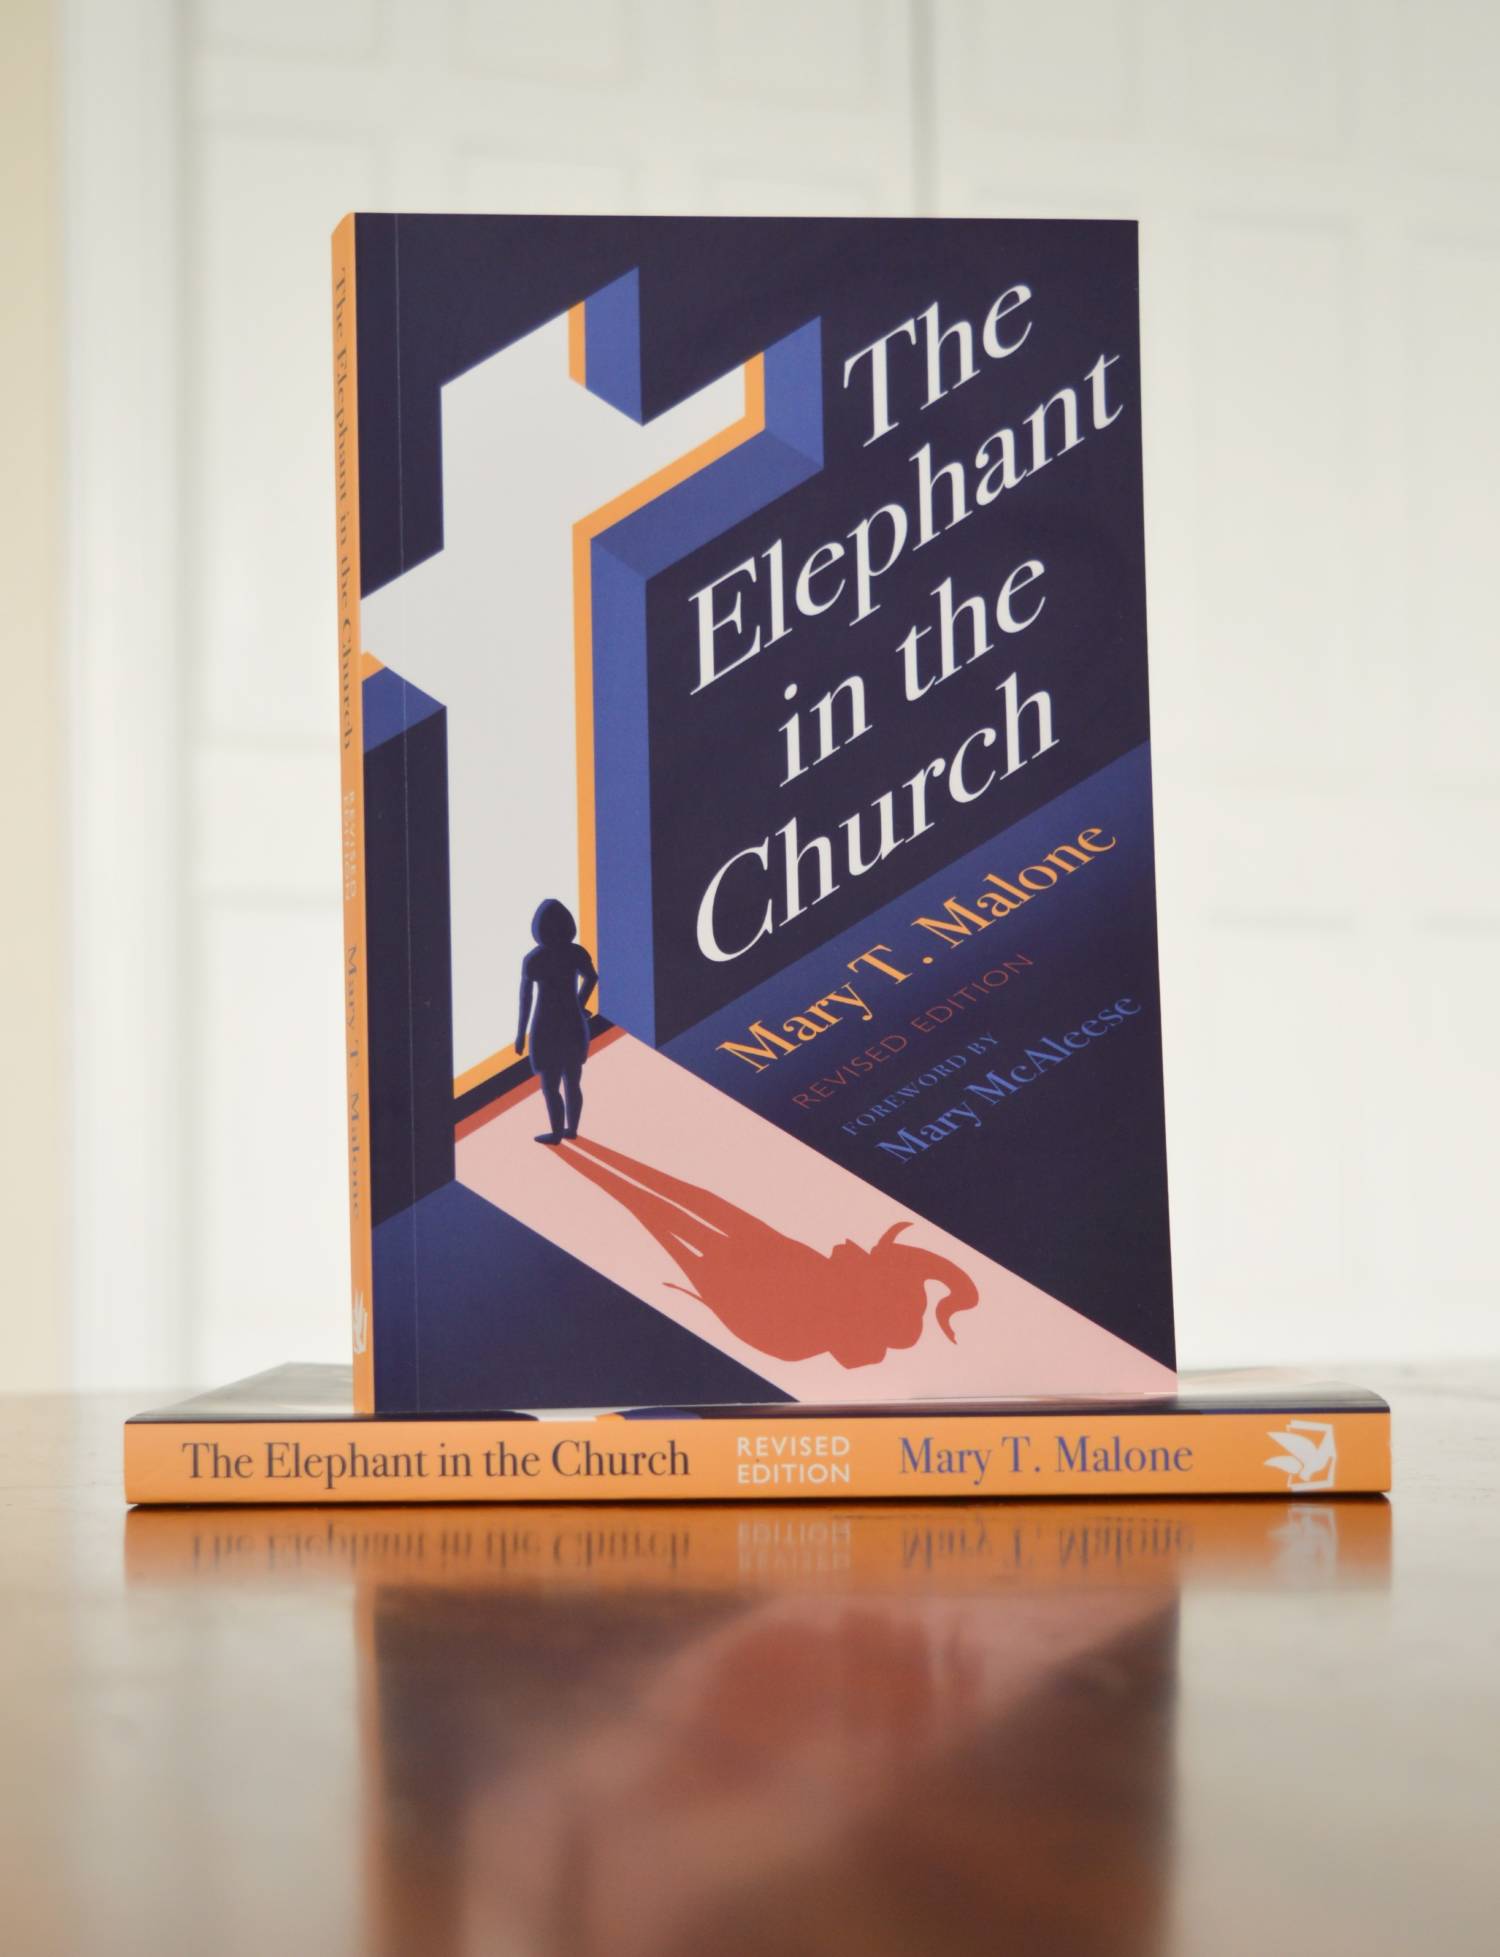 The Elephant in the Church by Mary T. Malone